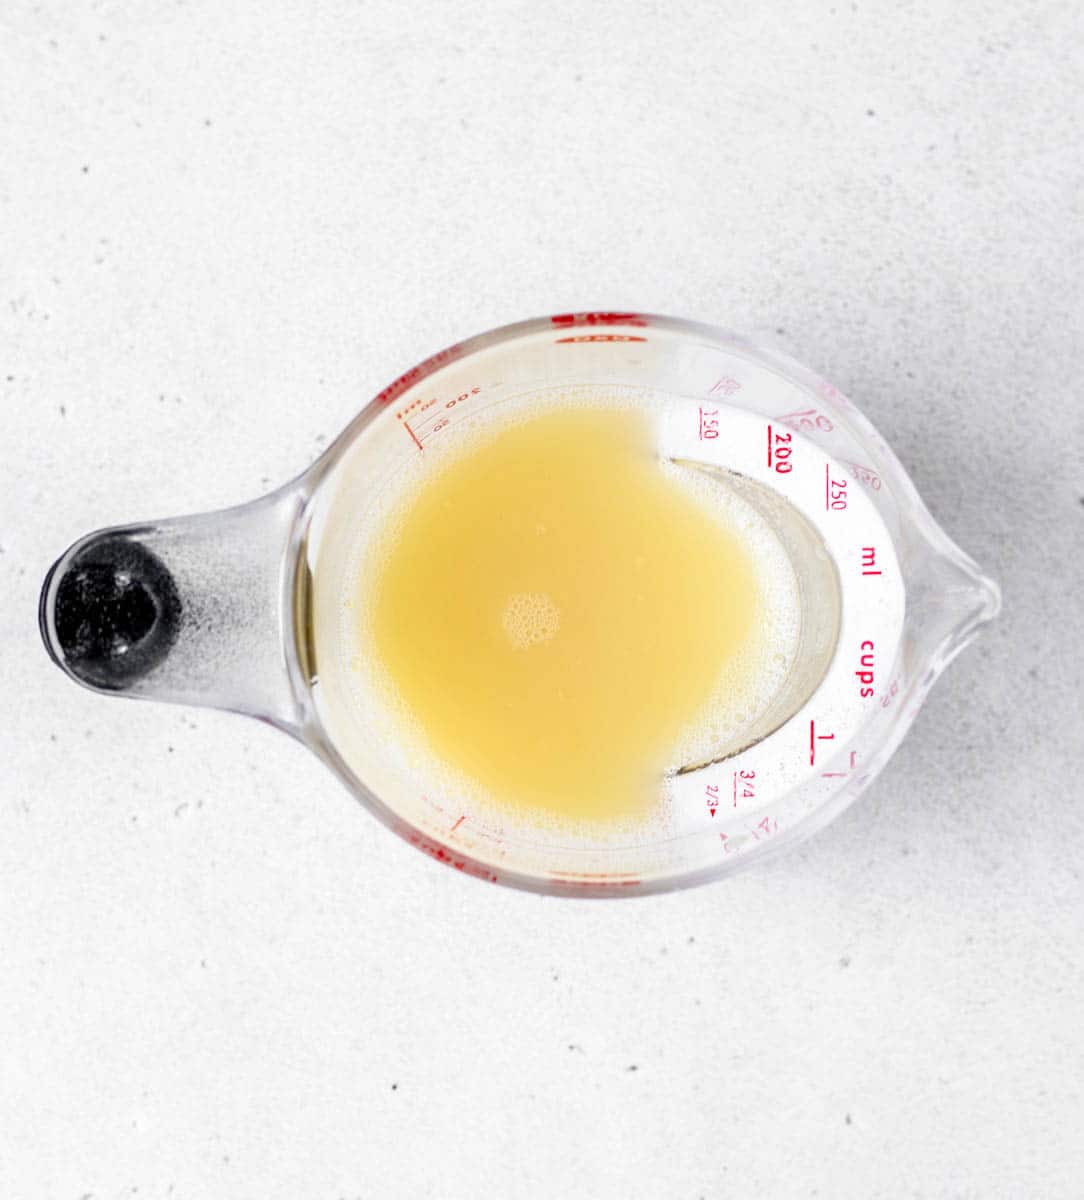 Pineapple juice mixed with cornstarch in a measuring cup.